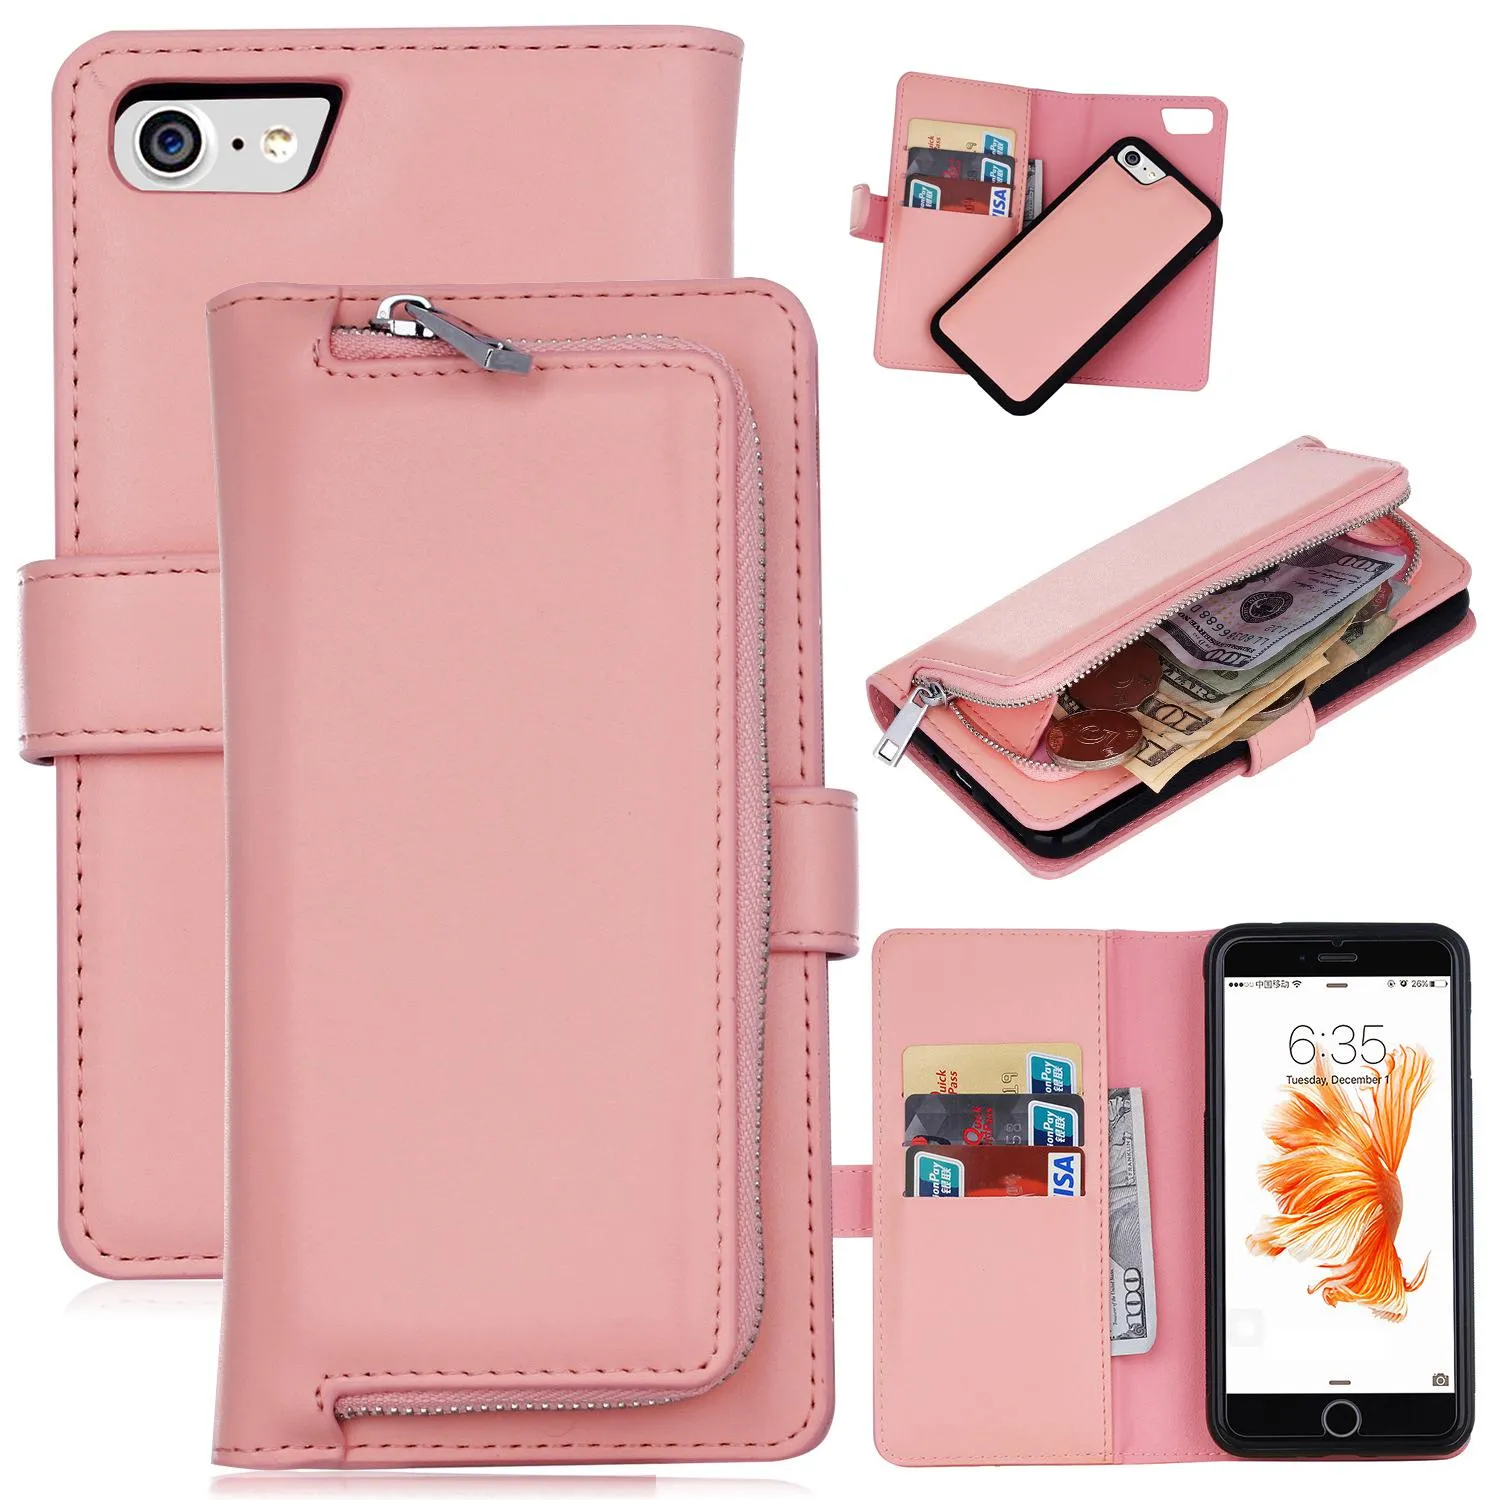 2 in 1 Magnet Detachable Removable Zipper Leather Wallet Cases Cover for iphone 7 8 